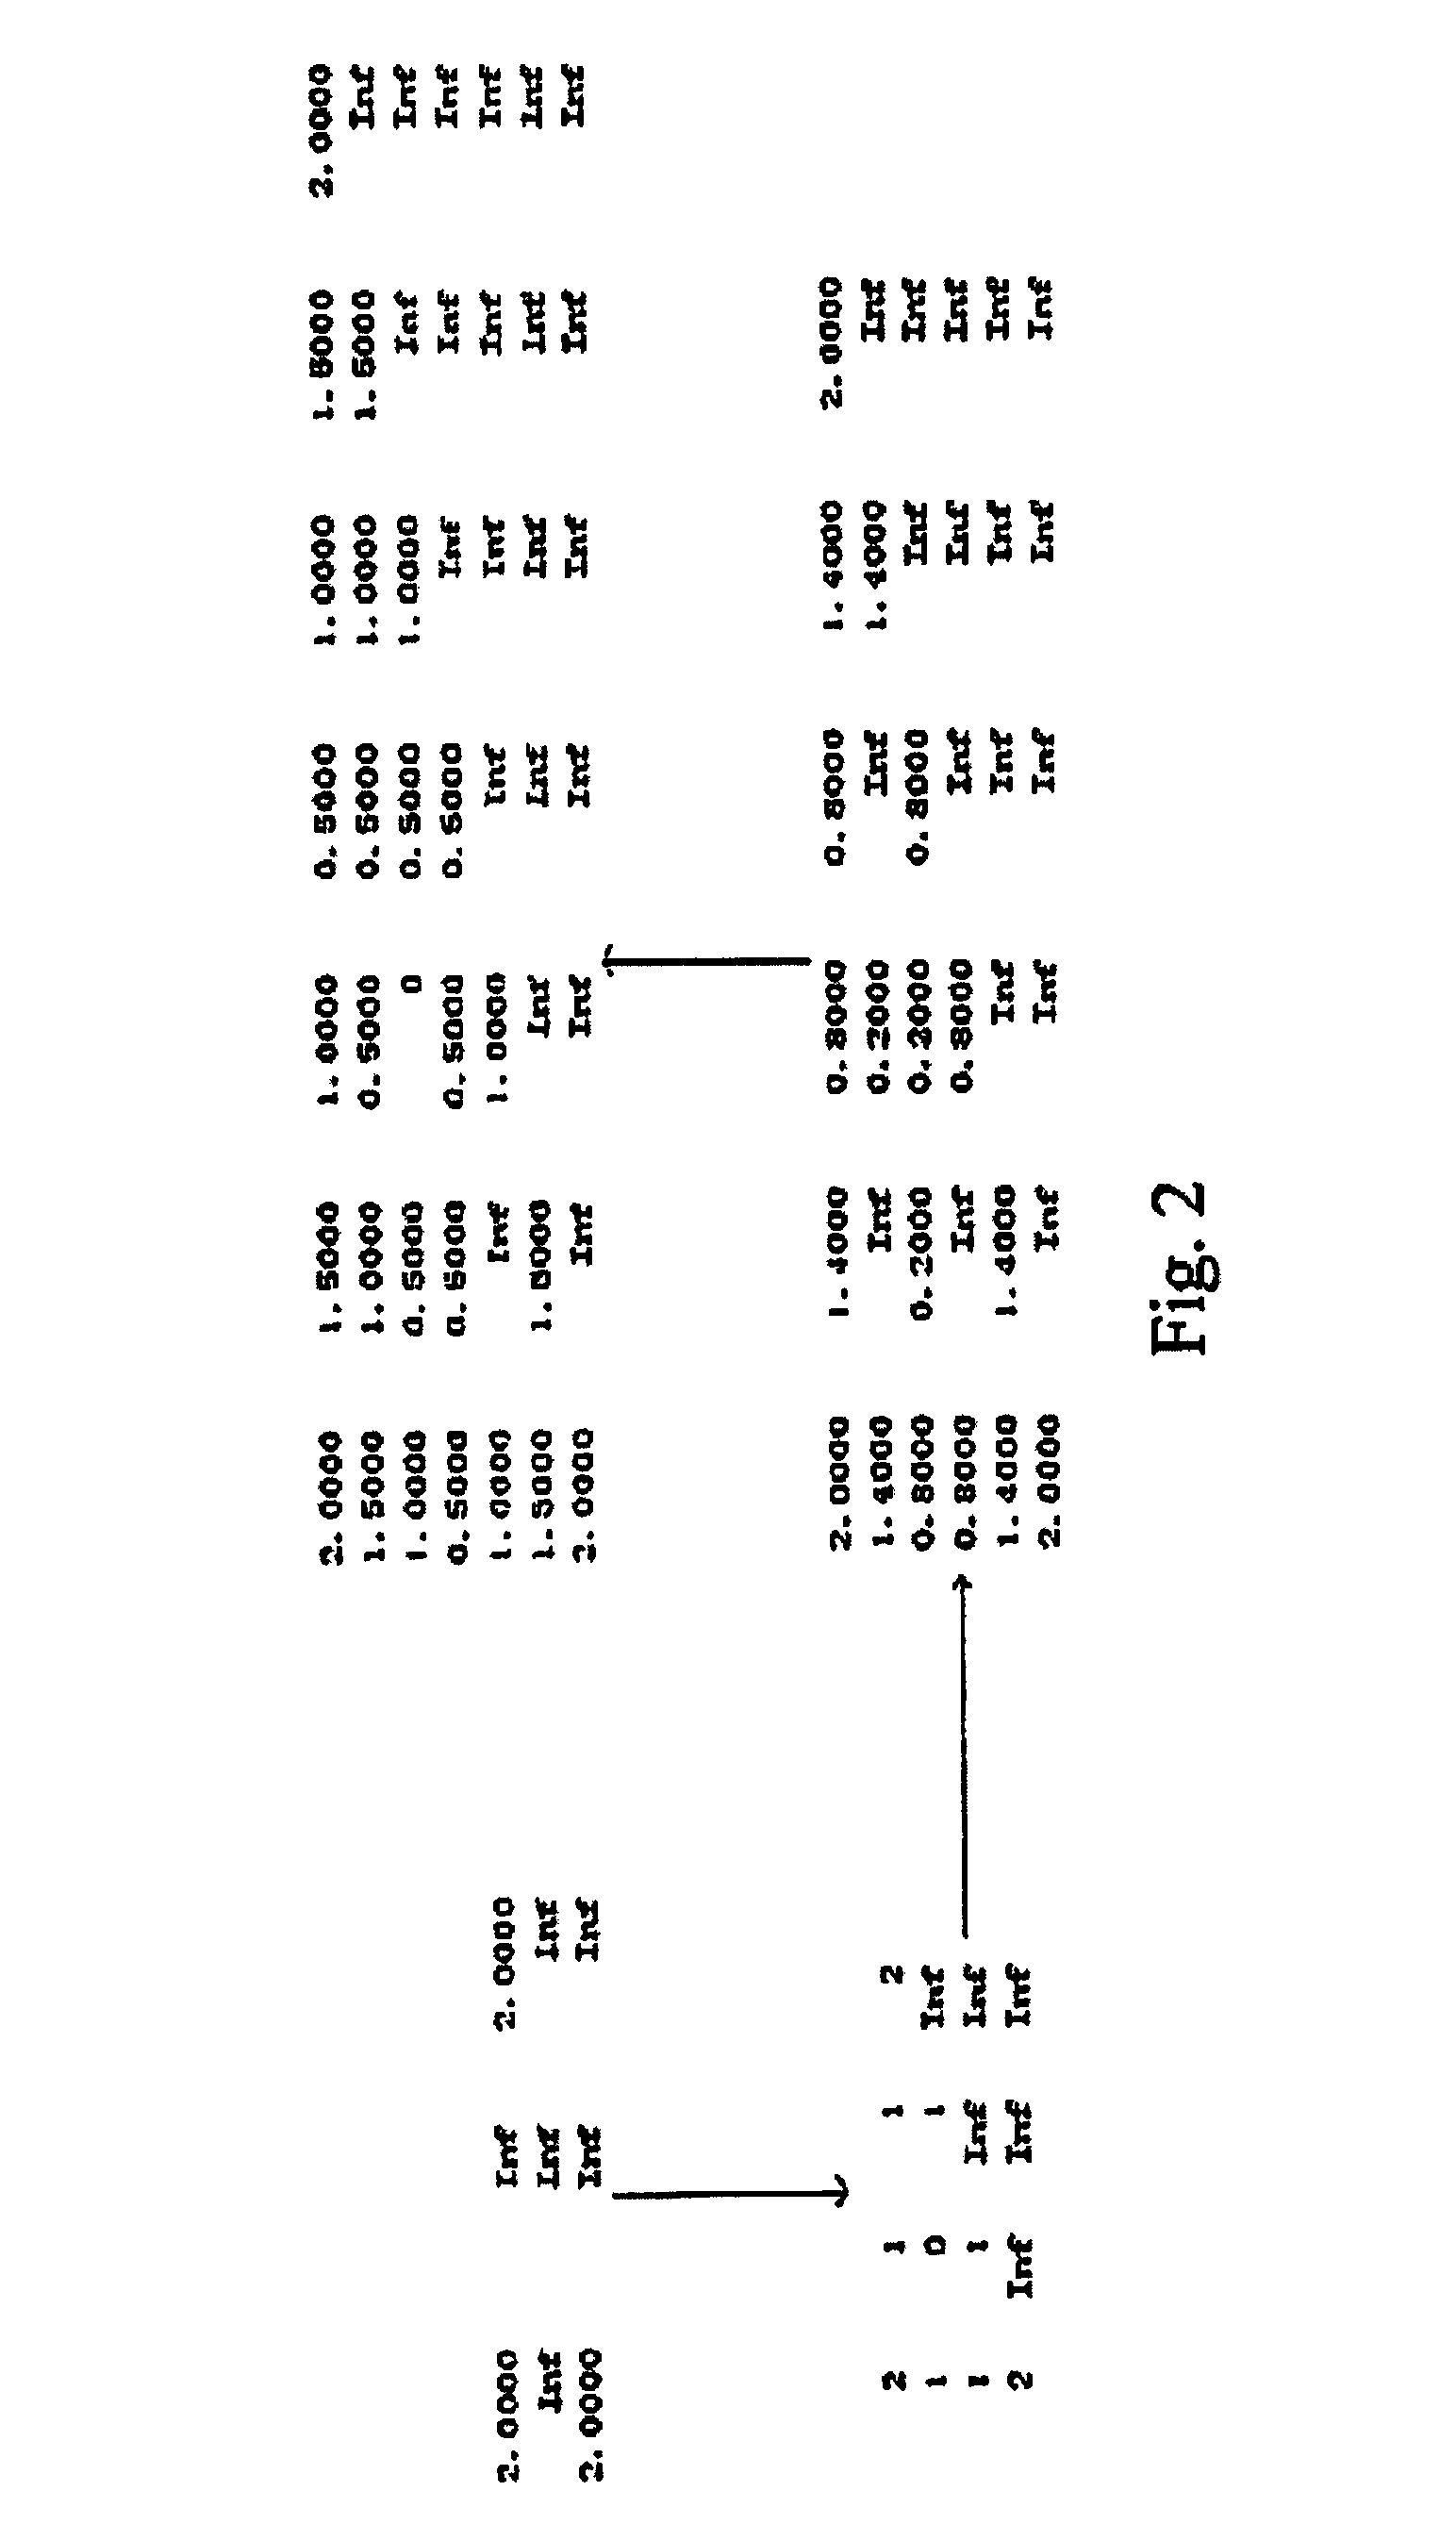 Apparatus and method for optimal phase balancing using dynamic programming with spatial consideration